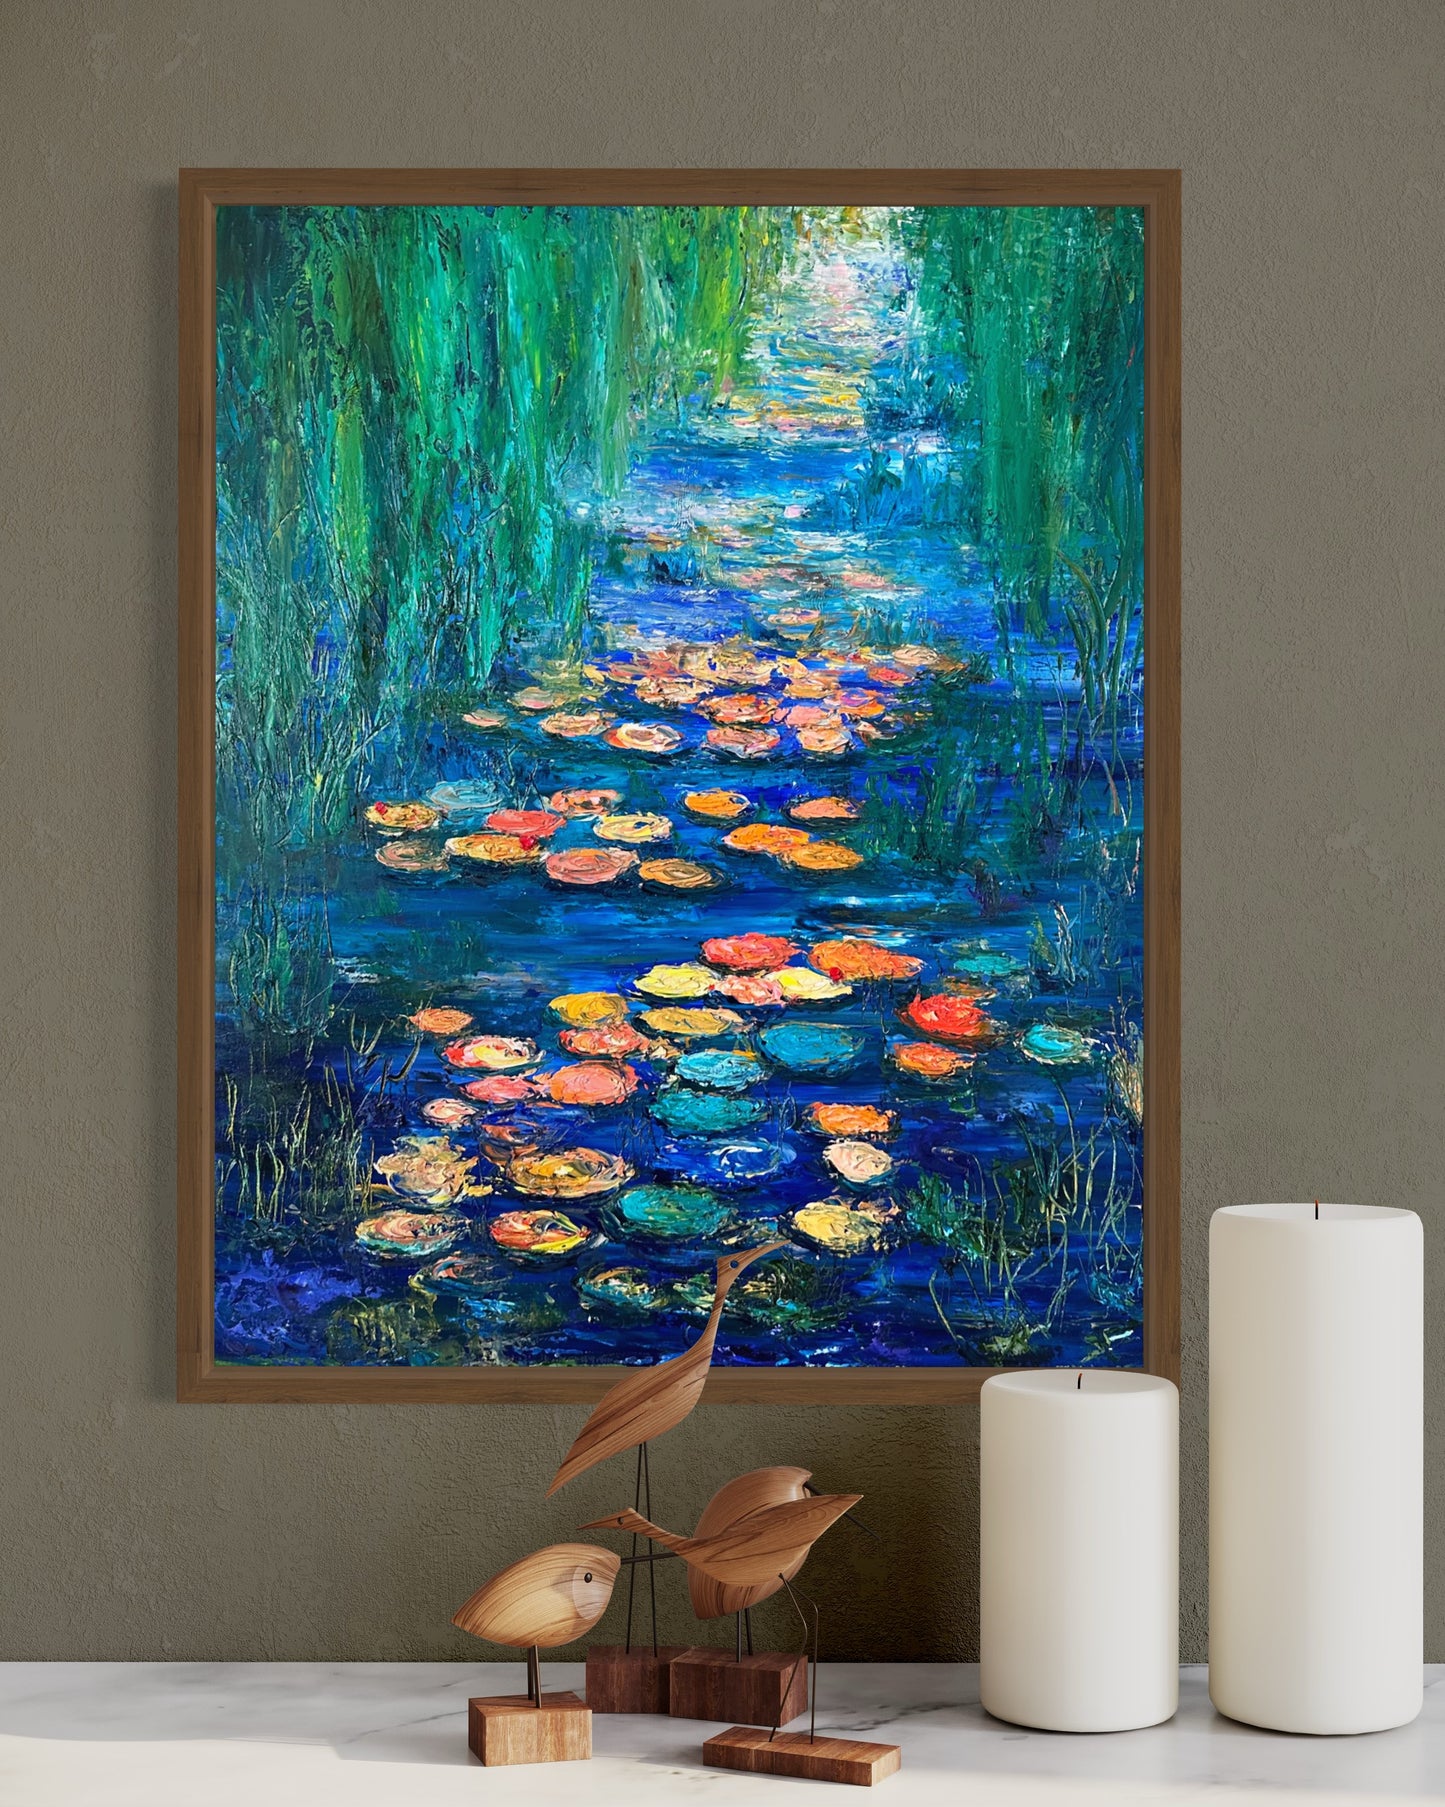 Water Lilies, OIL, 30" x 24"